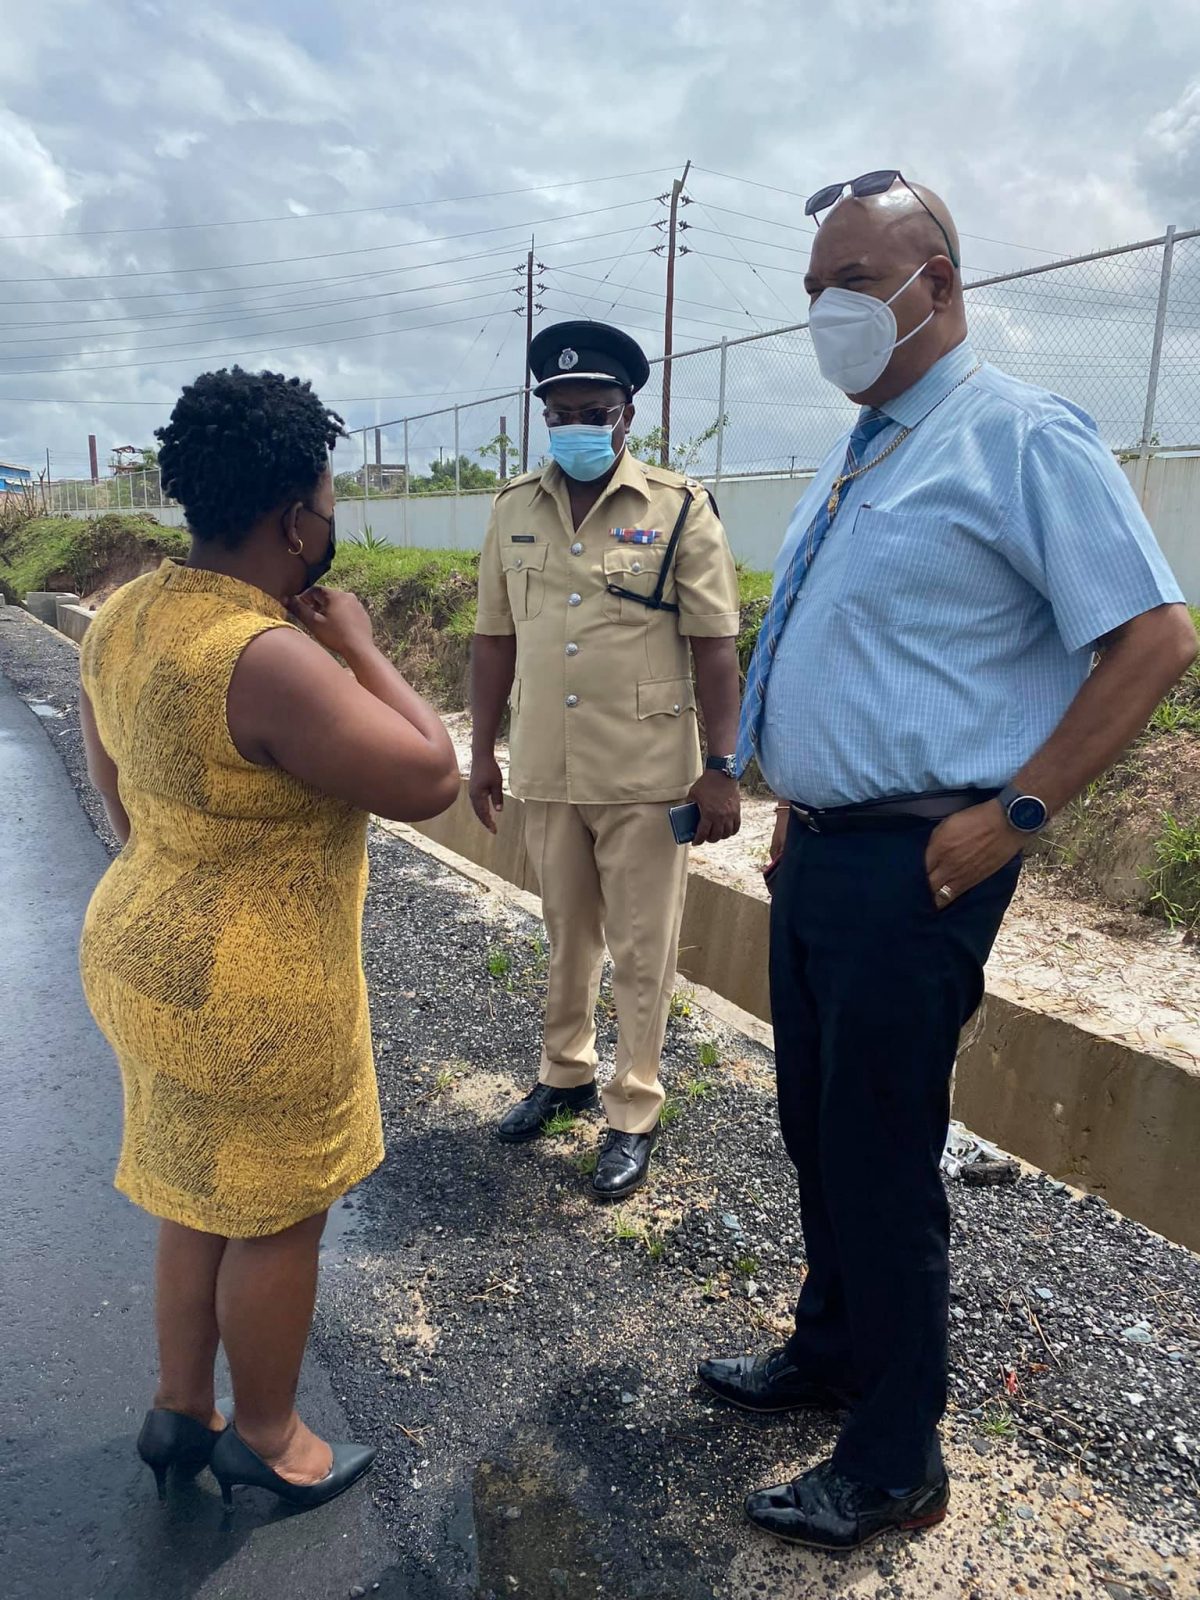 Minister of Public Works Juan Edghill (right) along with the Mayor of Linden, Waneka Arrindell (left) and a member of the Guyana Police Force in Linden today. (Ministry of Public Works photo) 